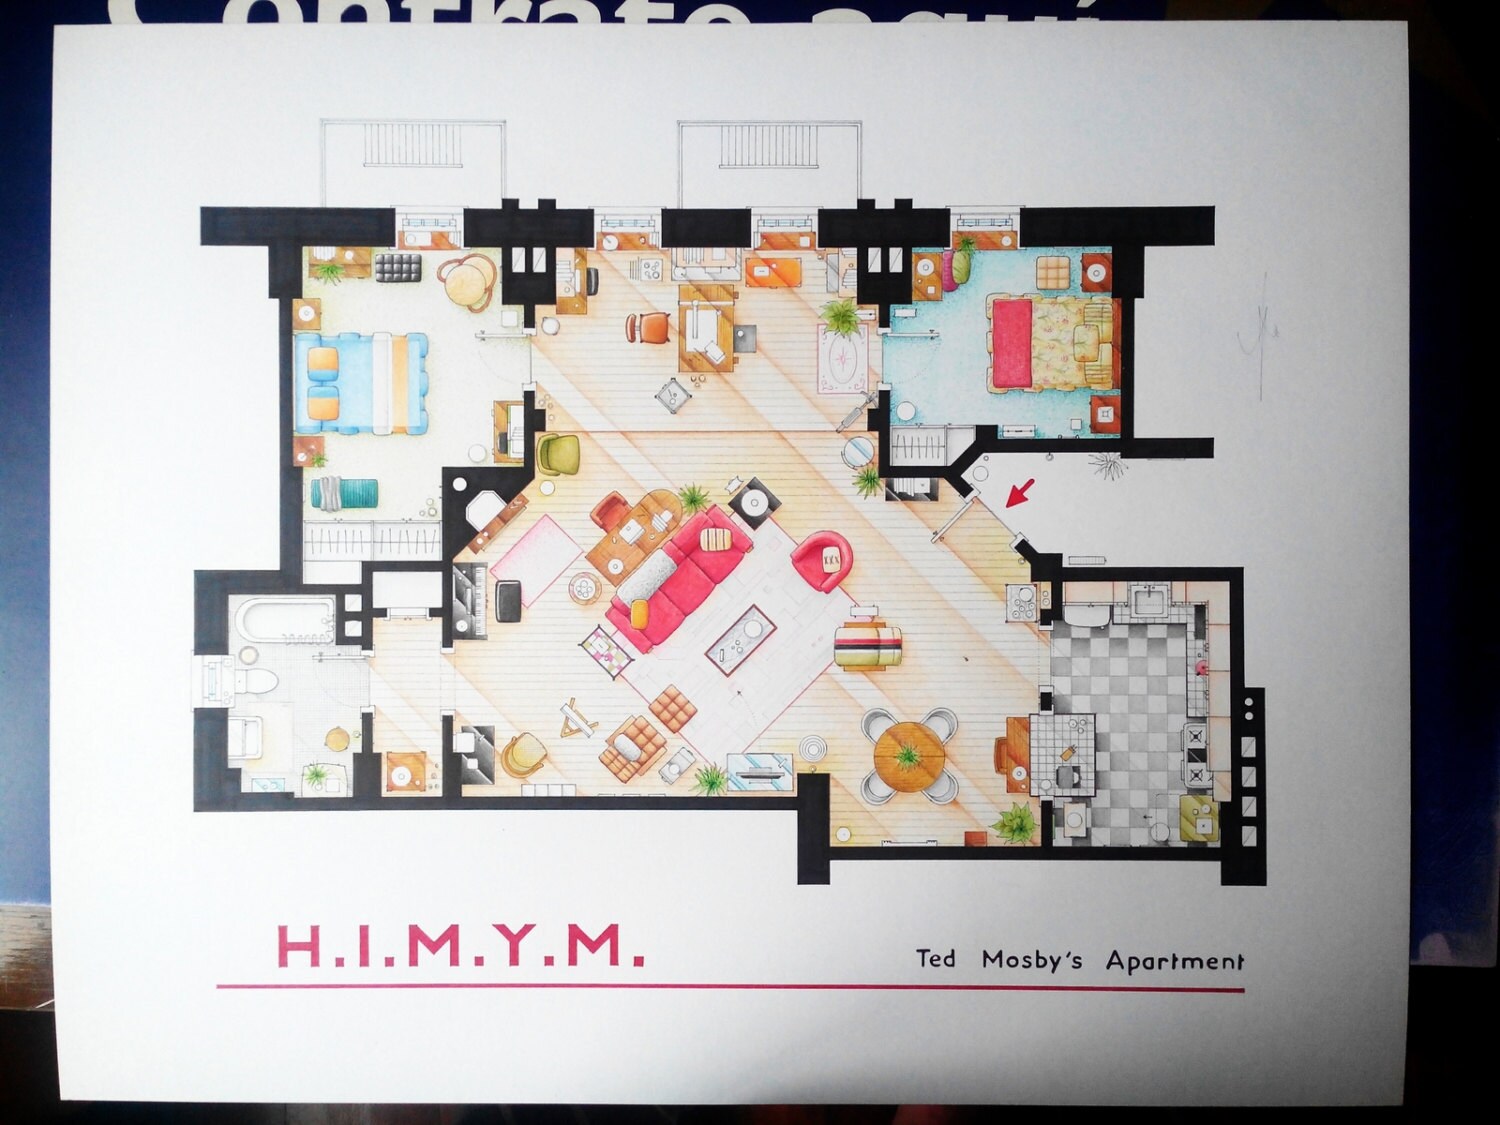 Ted Mosby's Apartment Floorplan from HIMYM